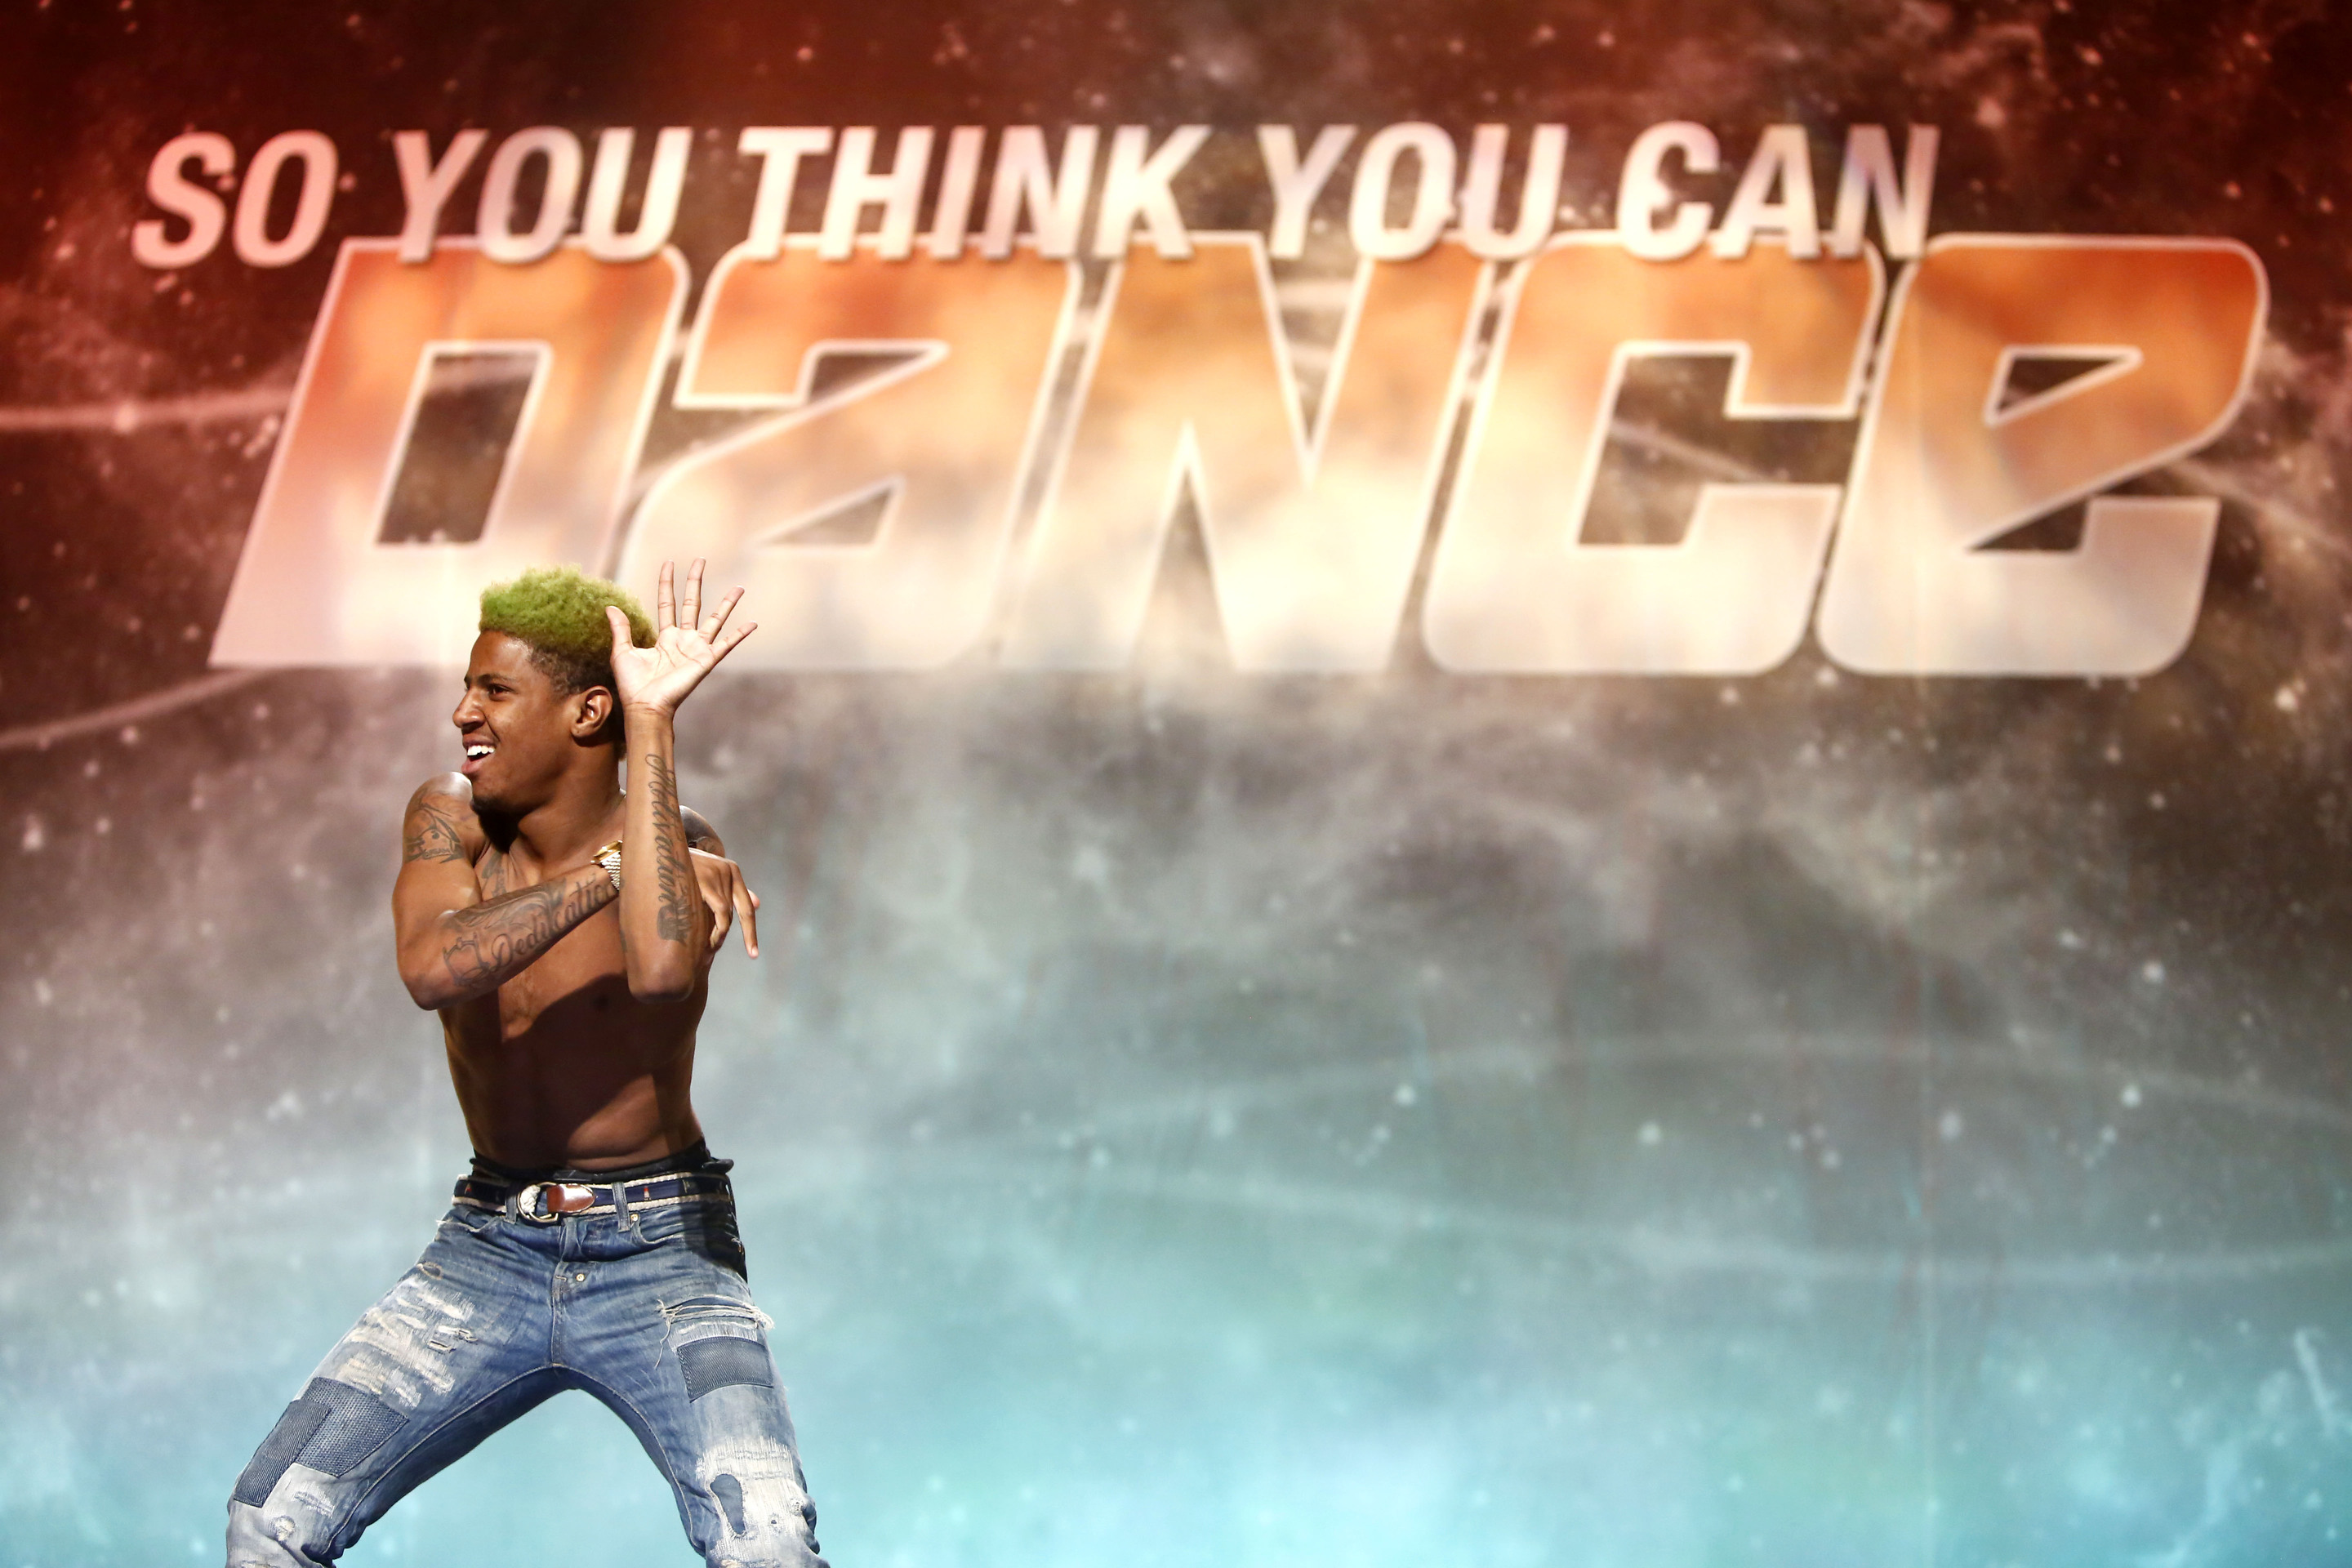 So You Think You Can Dance, So You Think You Can Dance Season 14, So You Think You Can Dance 2017, So You Think You Can Dance Live Stream, So You Think You Can Dance Season 14 Premiere, So You Think You Can Dance 2017 Live Stream, Watch So You Think You Can Dance Online, SYTYCD 2017 Live Stream, Watch SYTYCD Online